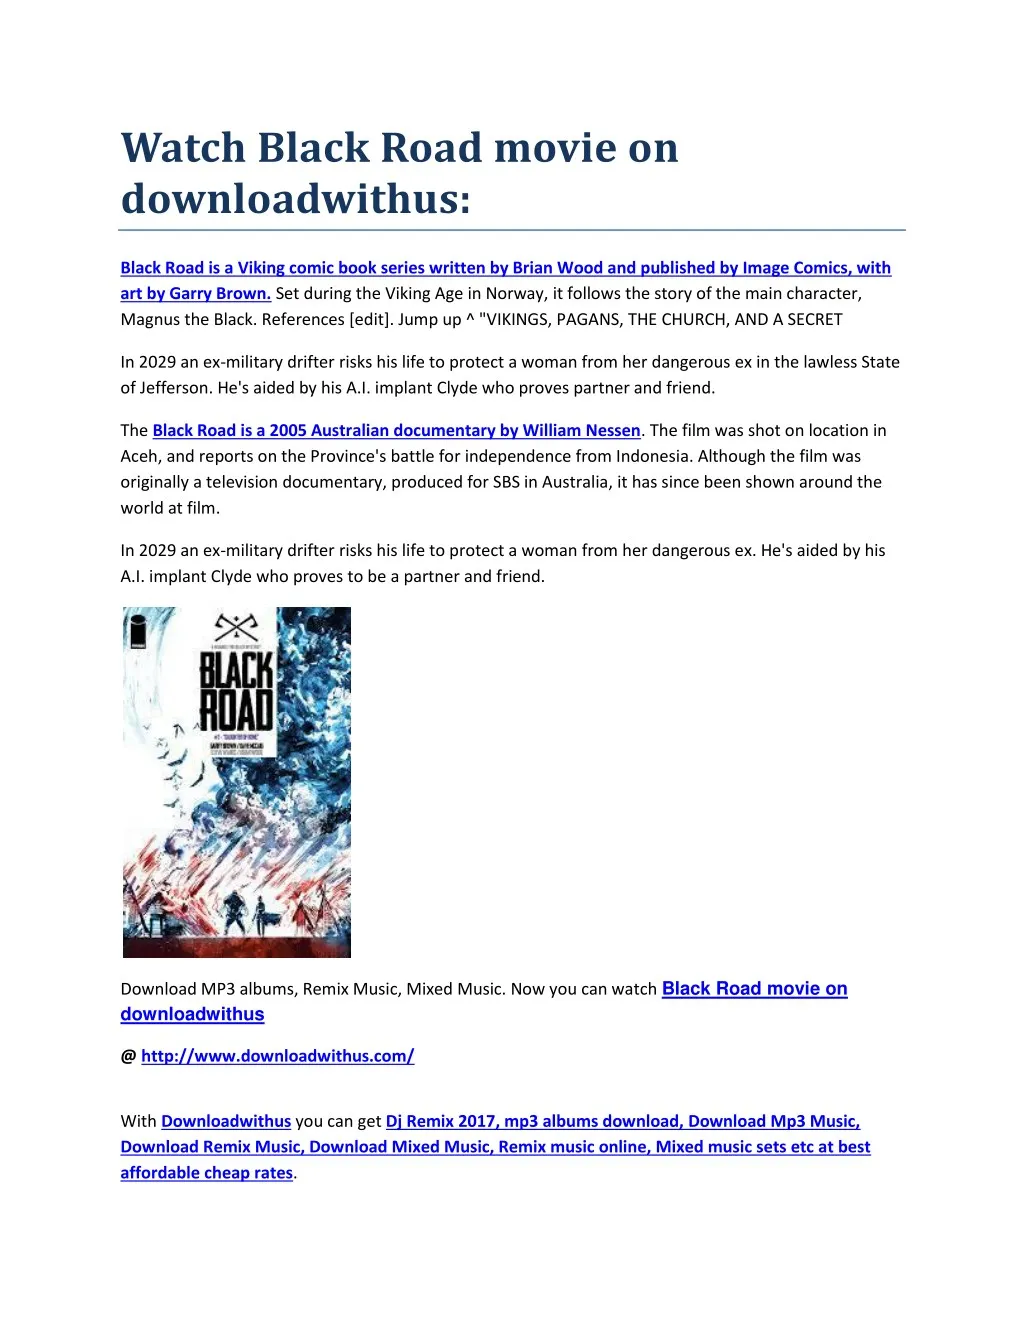 watch black road movie on downloadwithus